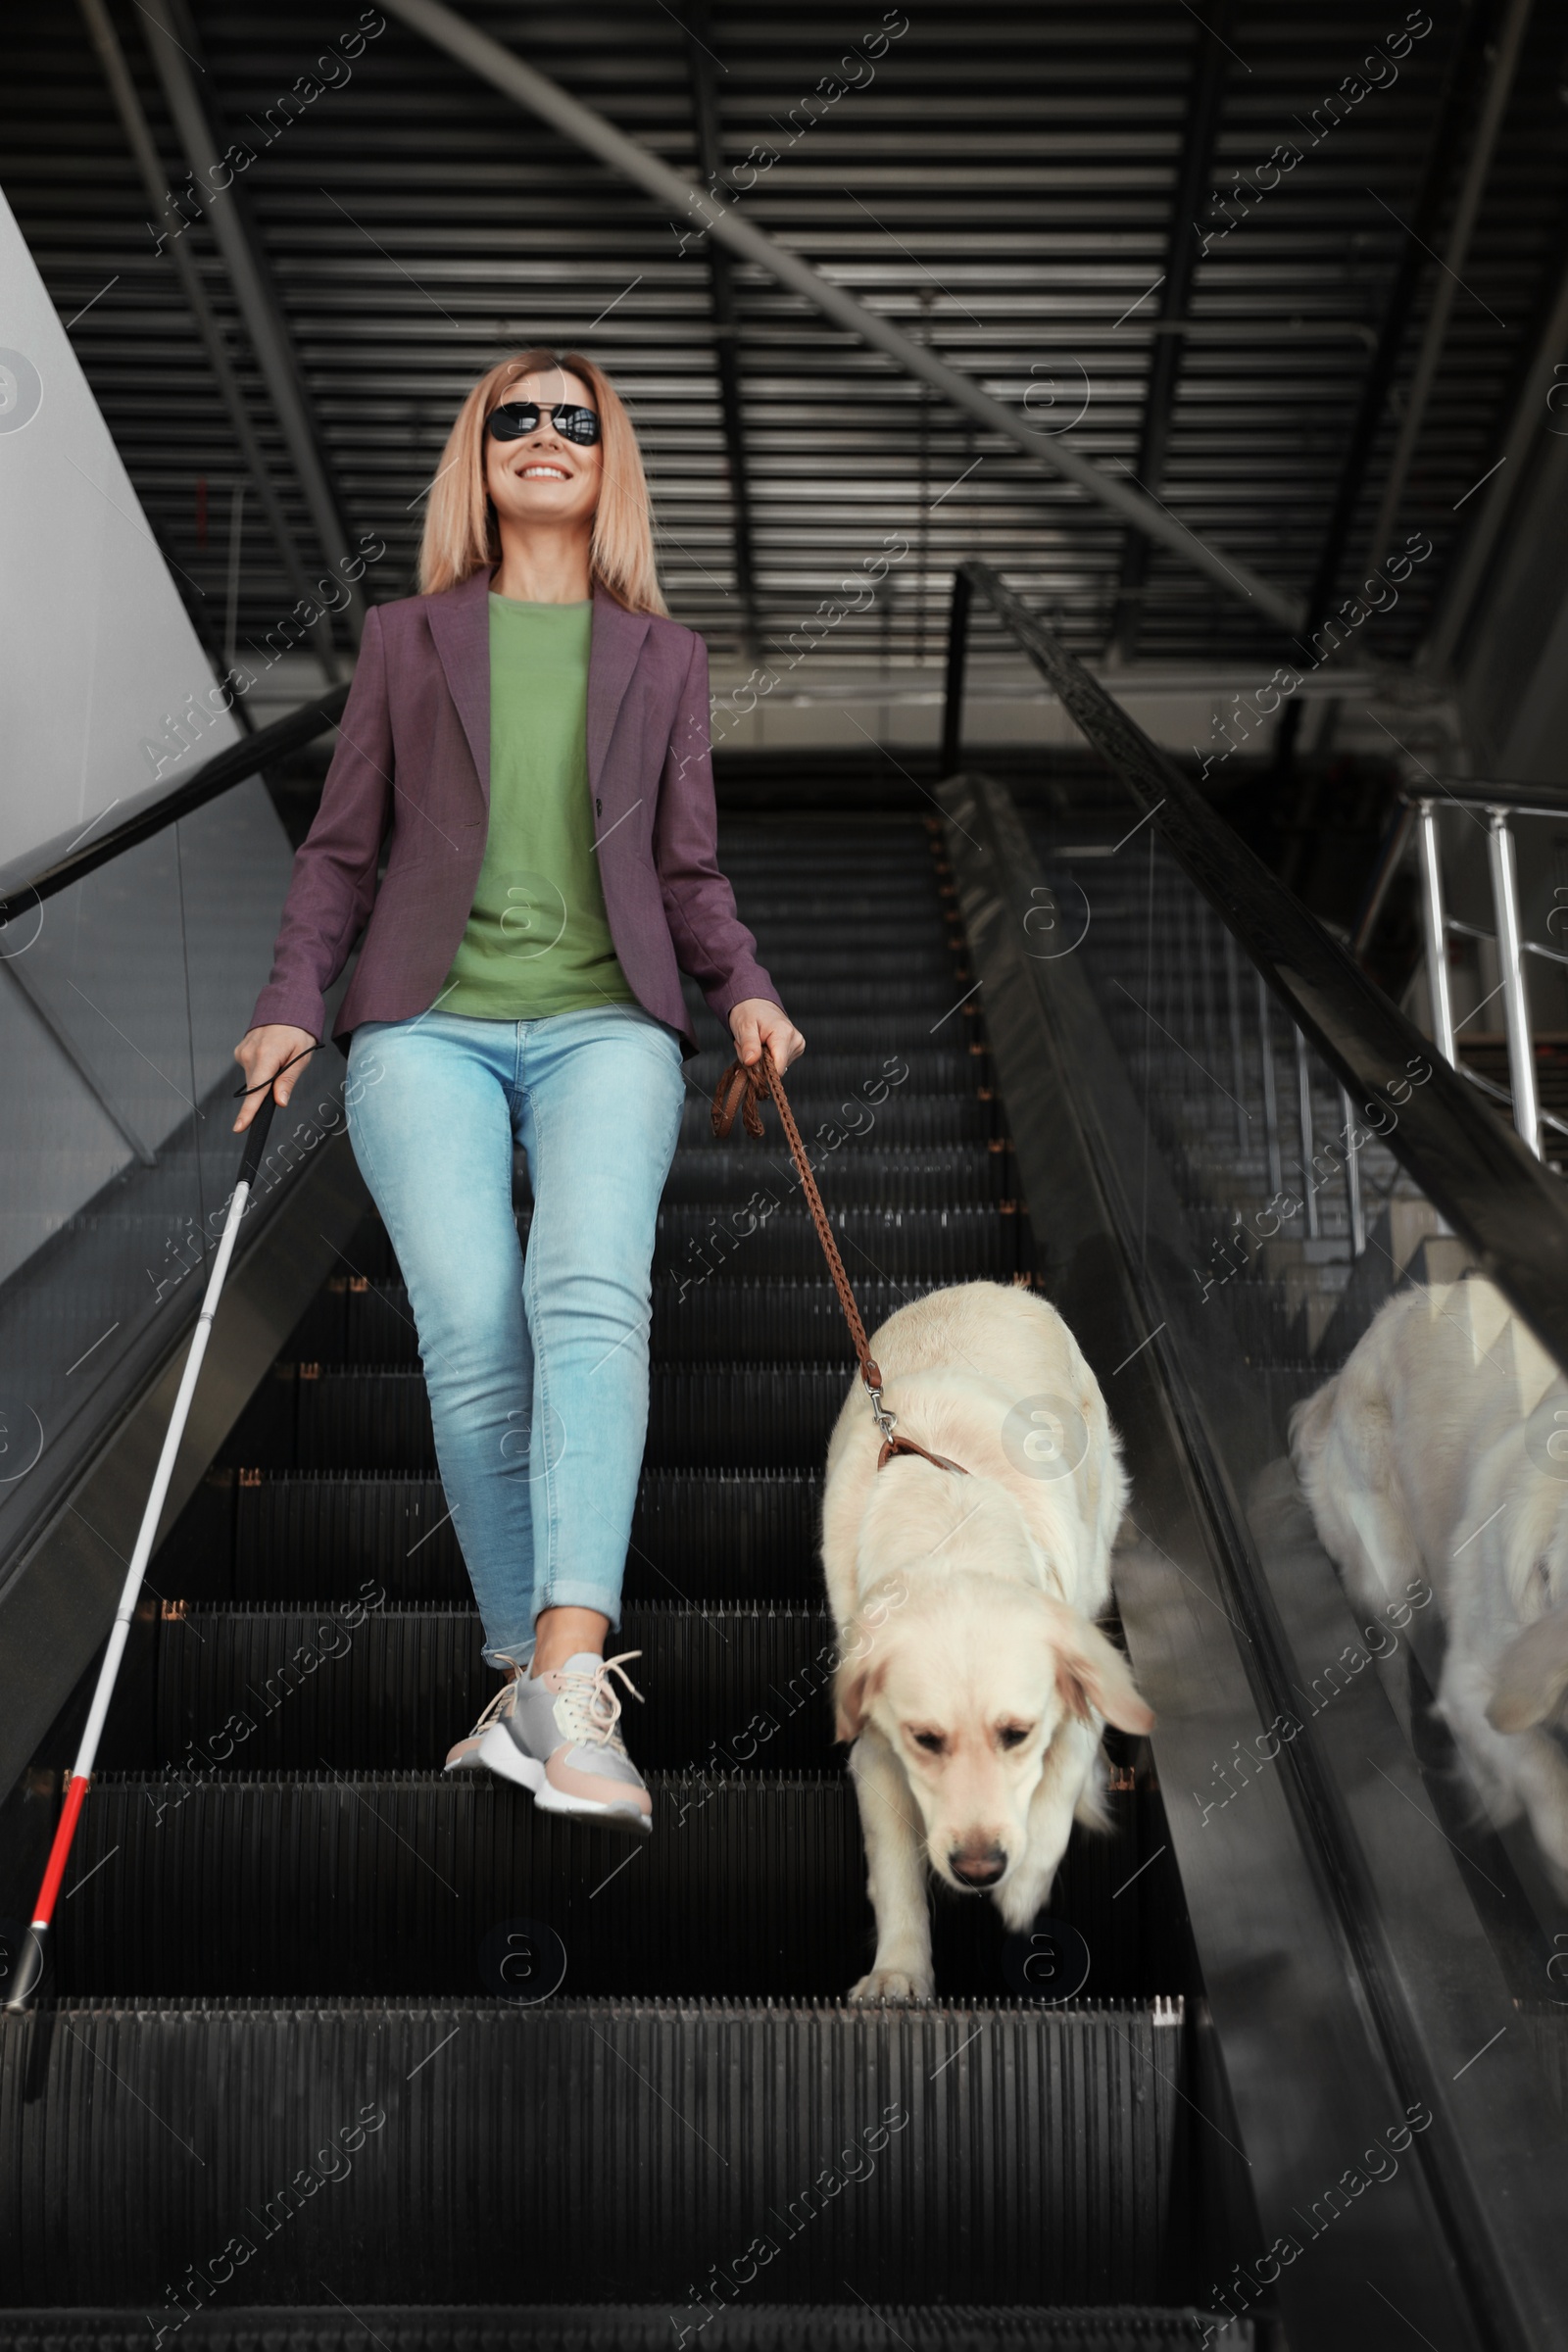 Photo of Blind person with long cane and guide dog on escalator indoors